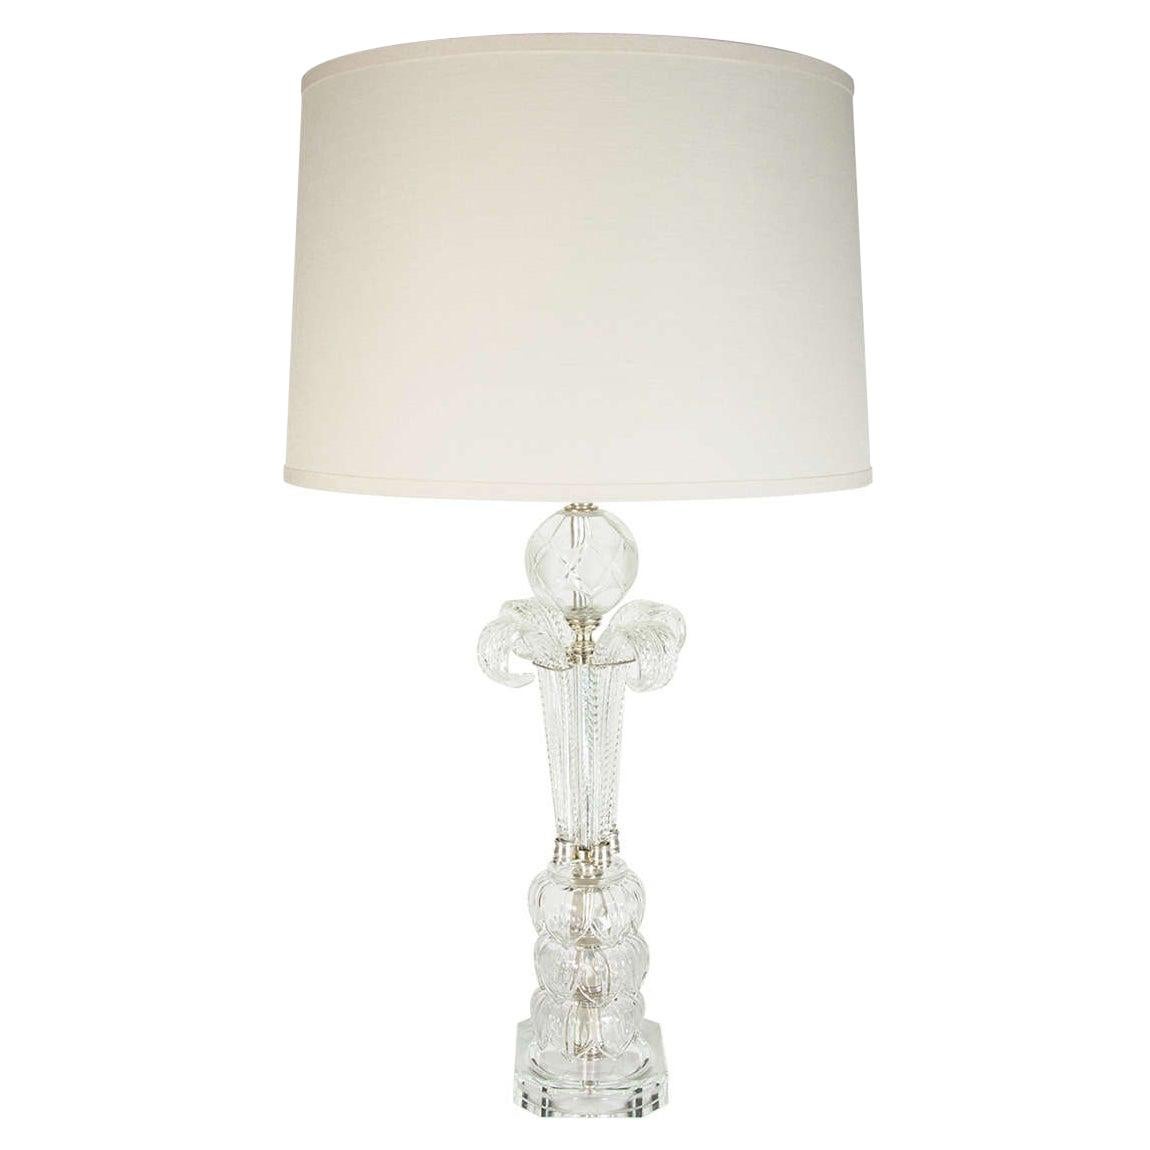 1940s Hollywood Translucent Cut Crystal Table Lamp with Acanthus Details